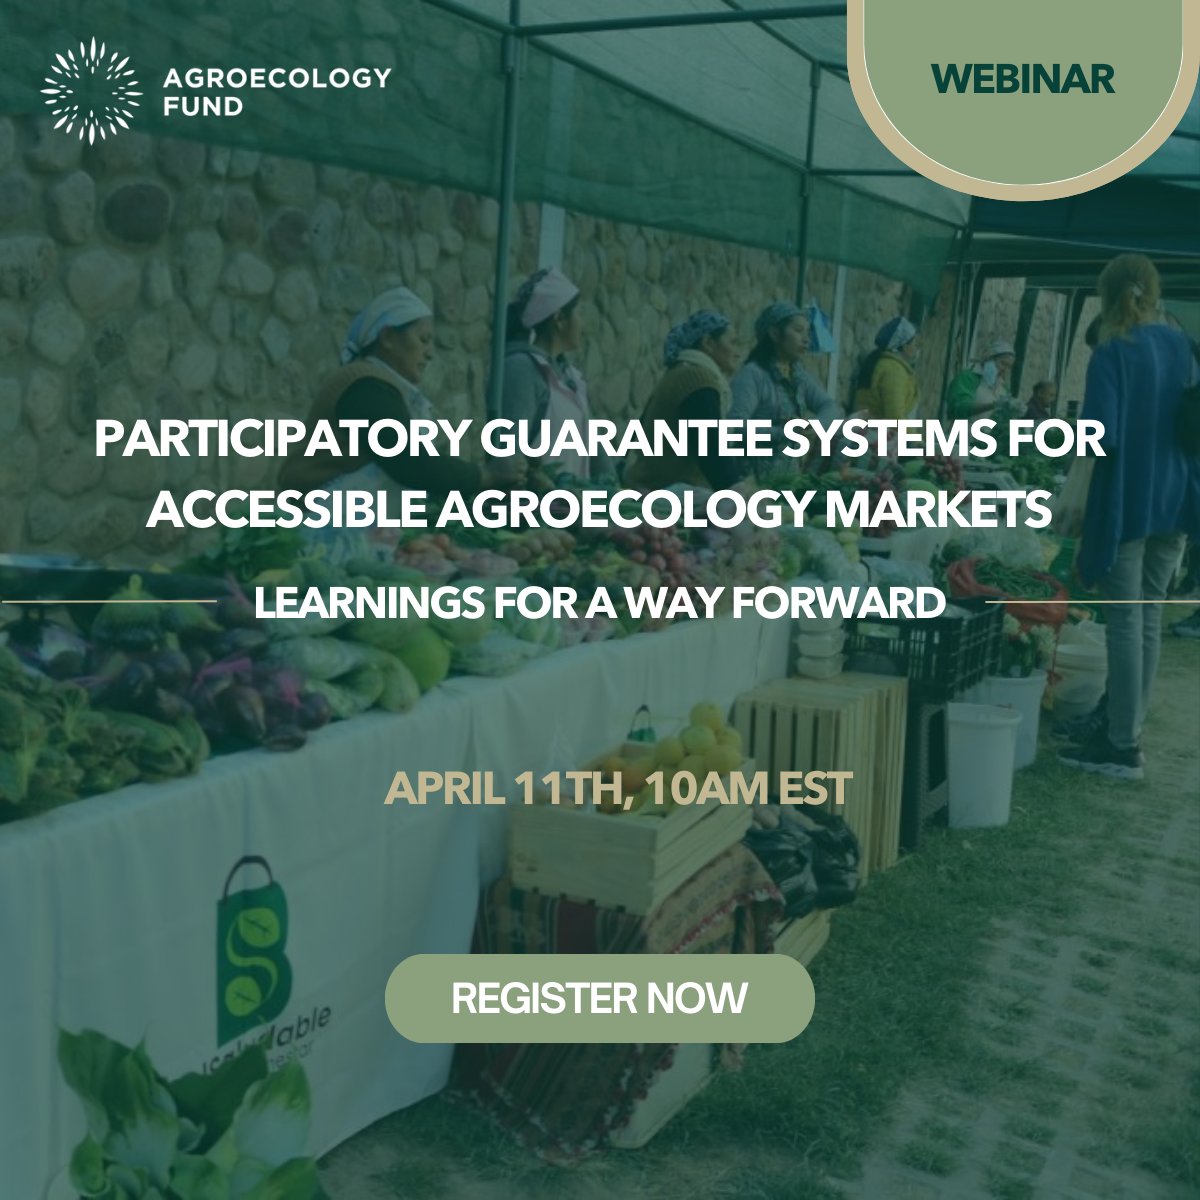 *Webinar Opportunity* Join us on April 11, 2024 at 10am EST for the first webinar in our 'Agroecology Economies' Series. We will discuss the role of Participatory Guarantee Systems (PGS) in promoting agroecology markets w/ folks from Asia, Africa, + Latin America Register ⬇️